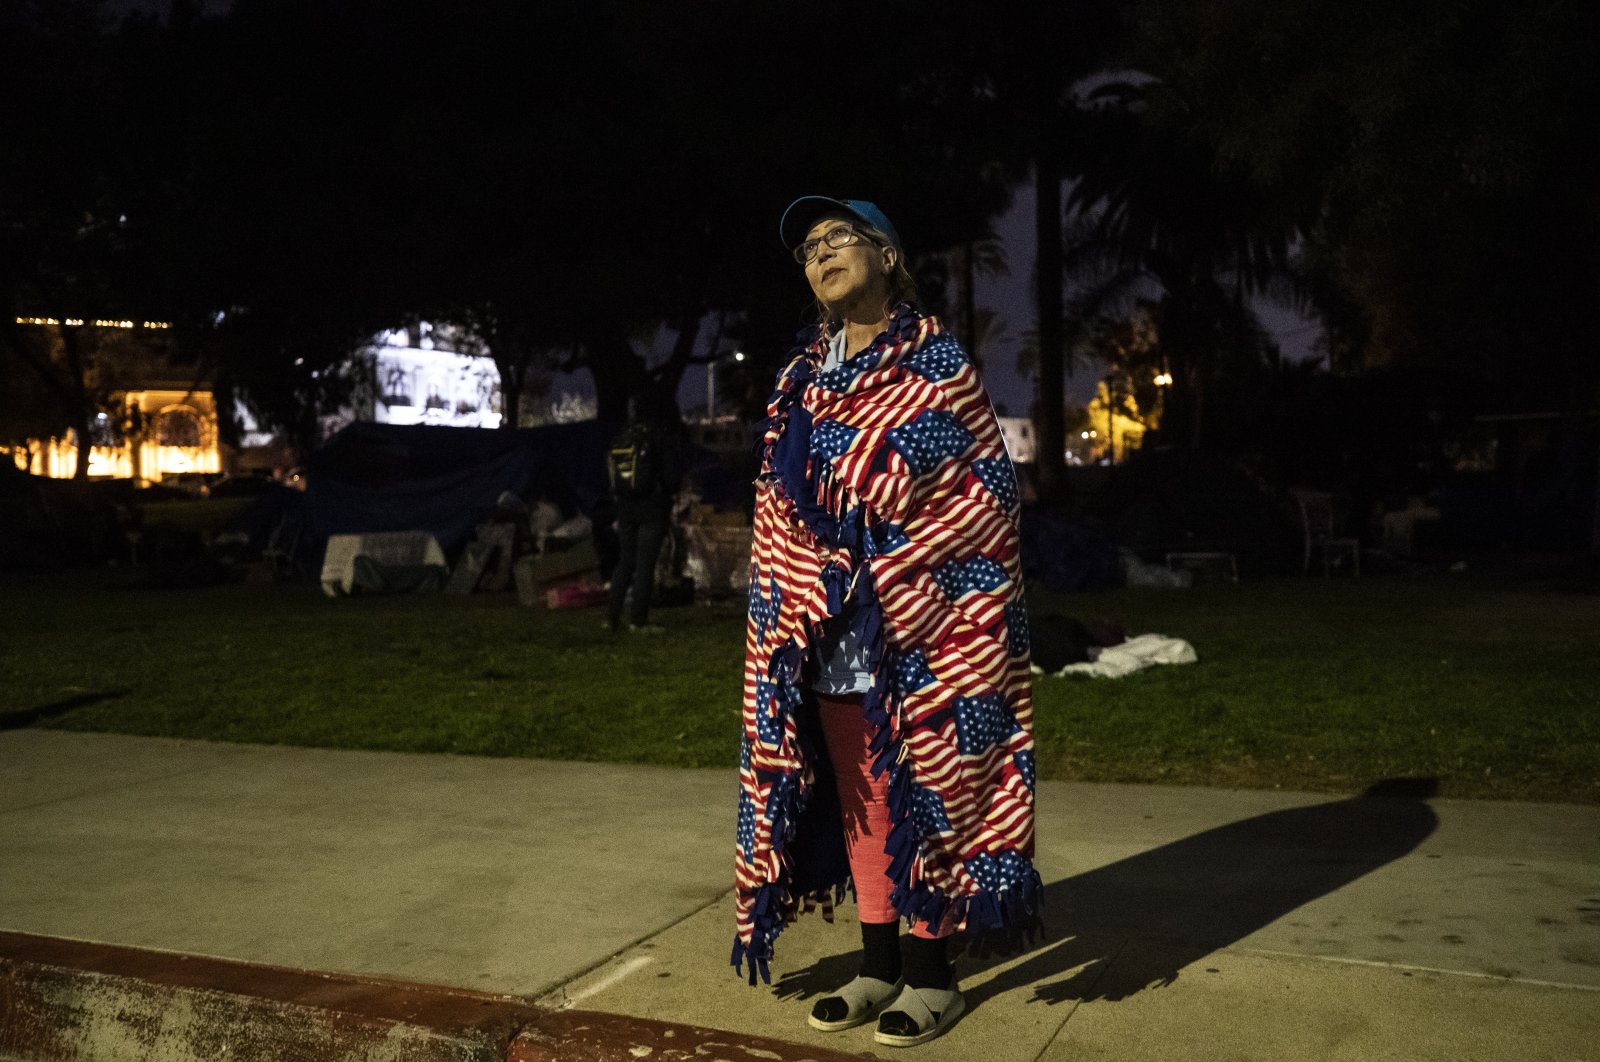 Antonia Ramirez from Mexico, experiencing homelessness for the past 20 years, stands wrapped in a blanket displaying American flags next to the tents of the homeless encampment of Echo Park Lake as a large police force is mobilized to clear the area in Los Angeles, California, U.S., March 24, 2021. (EPA Photo)